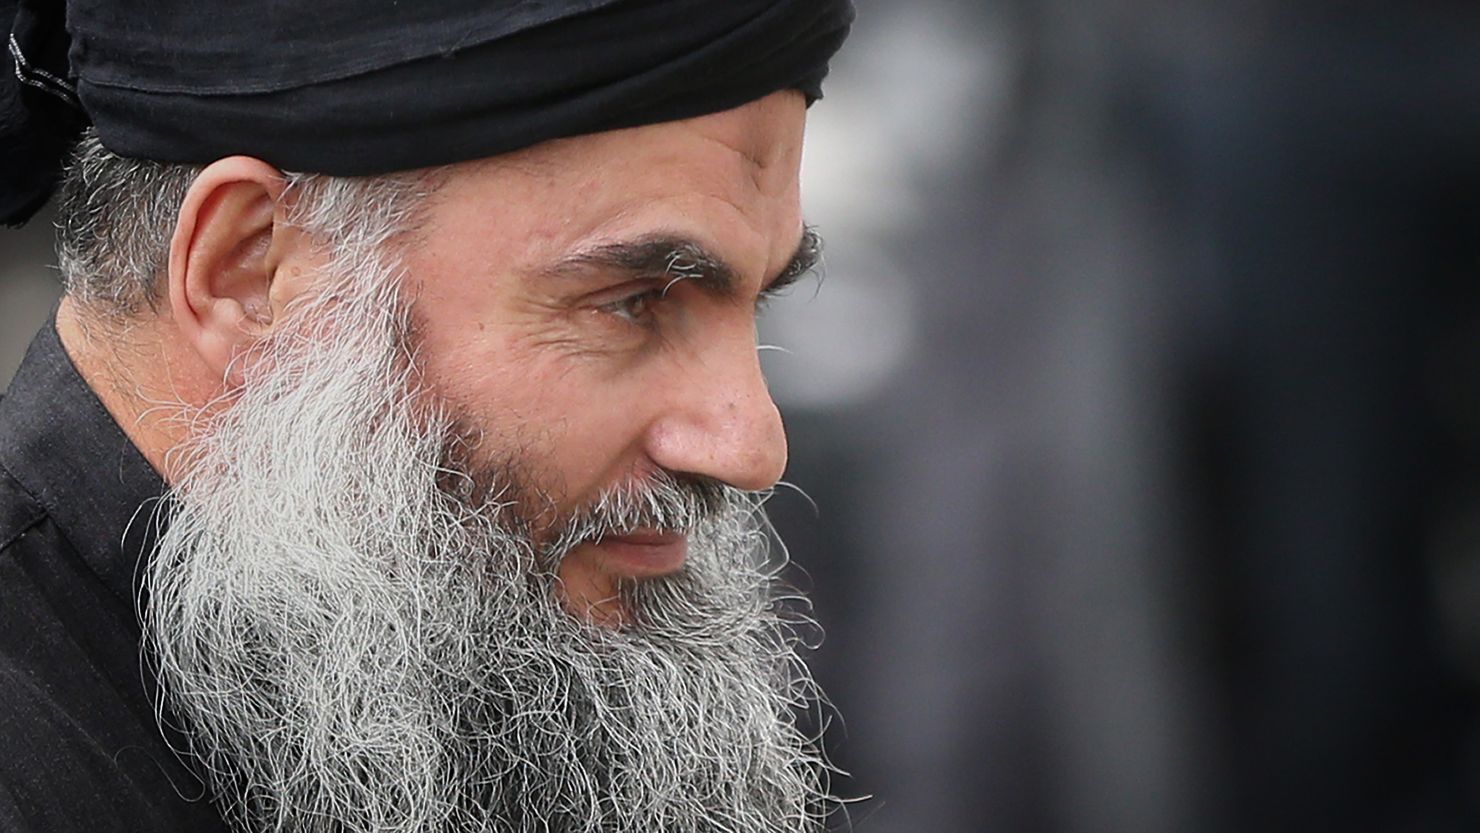 Muslim Cleric Abu Qatada arrives home after being released from prison on November 13, 2012 in London, England.